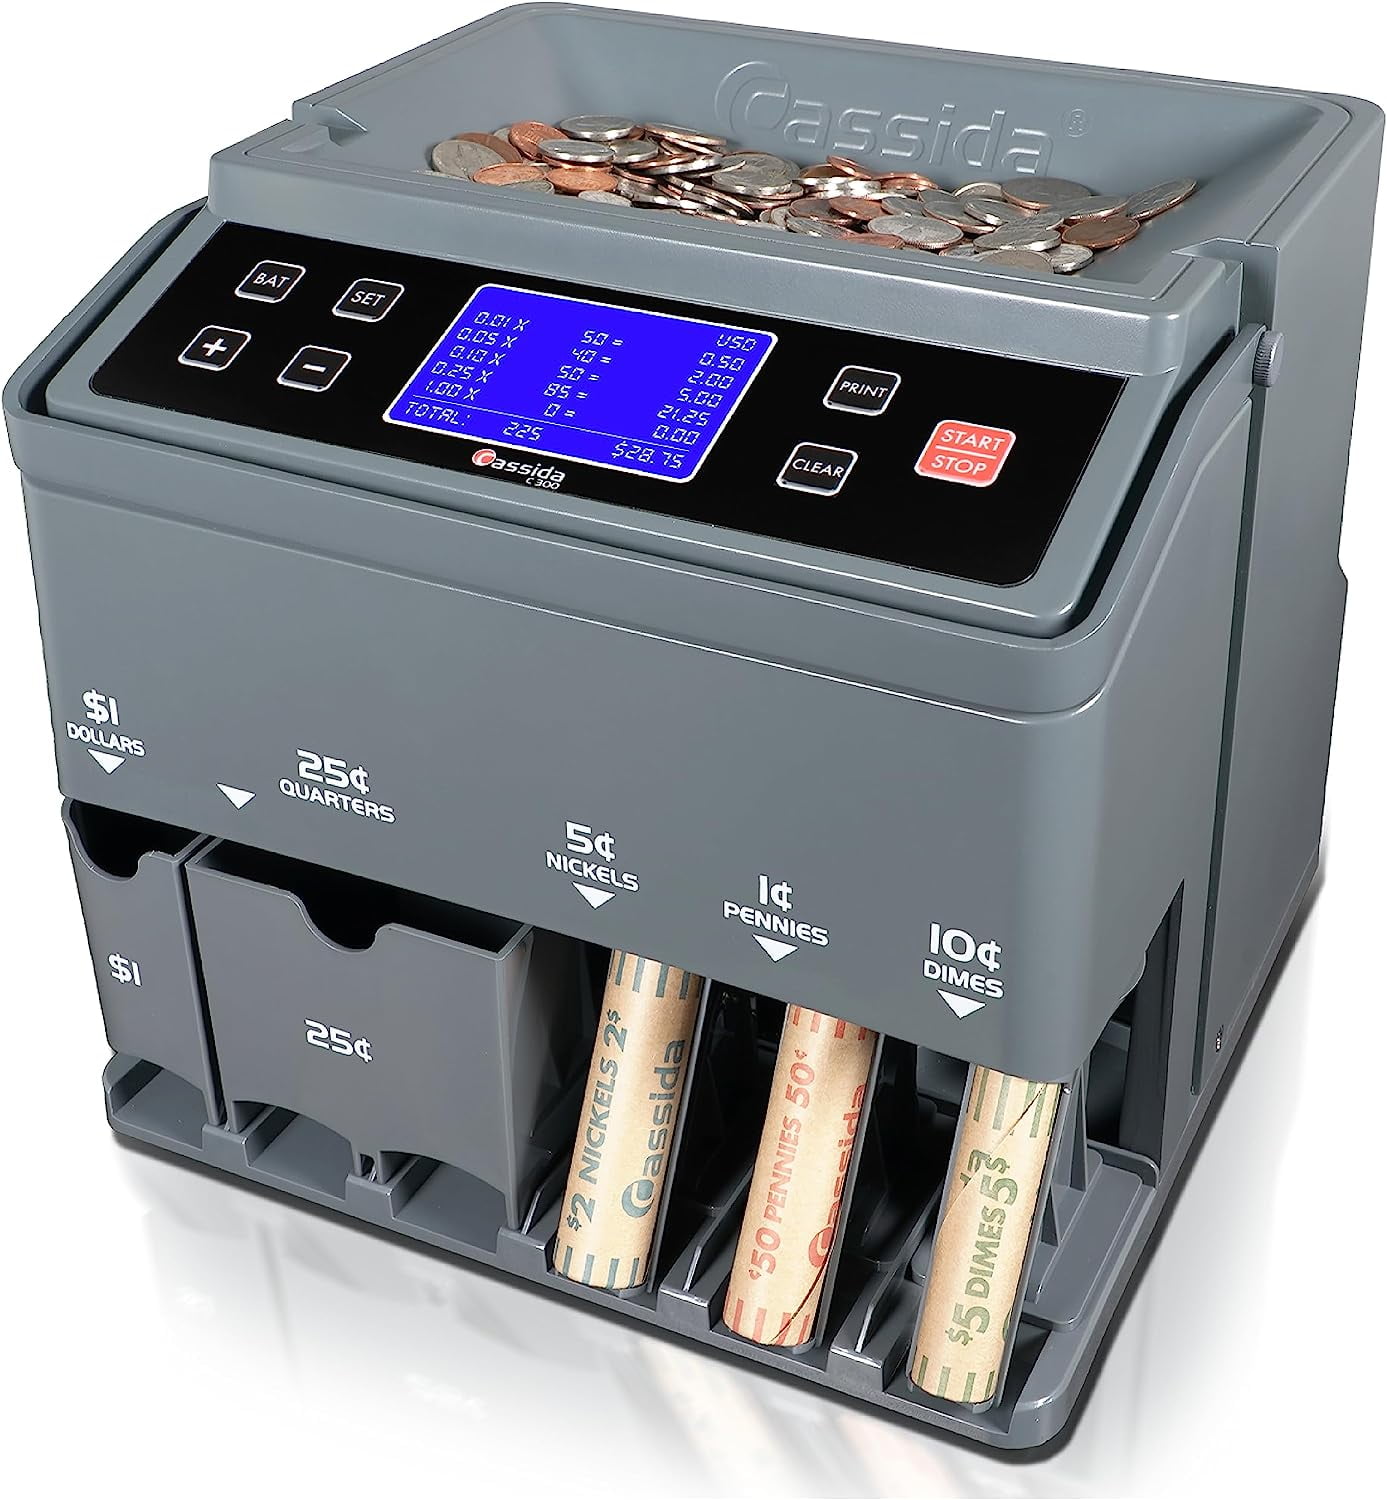 Get your coins in order fast with this DIY coin sorting machine